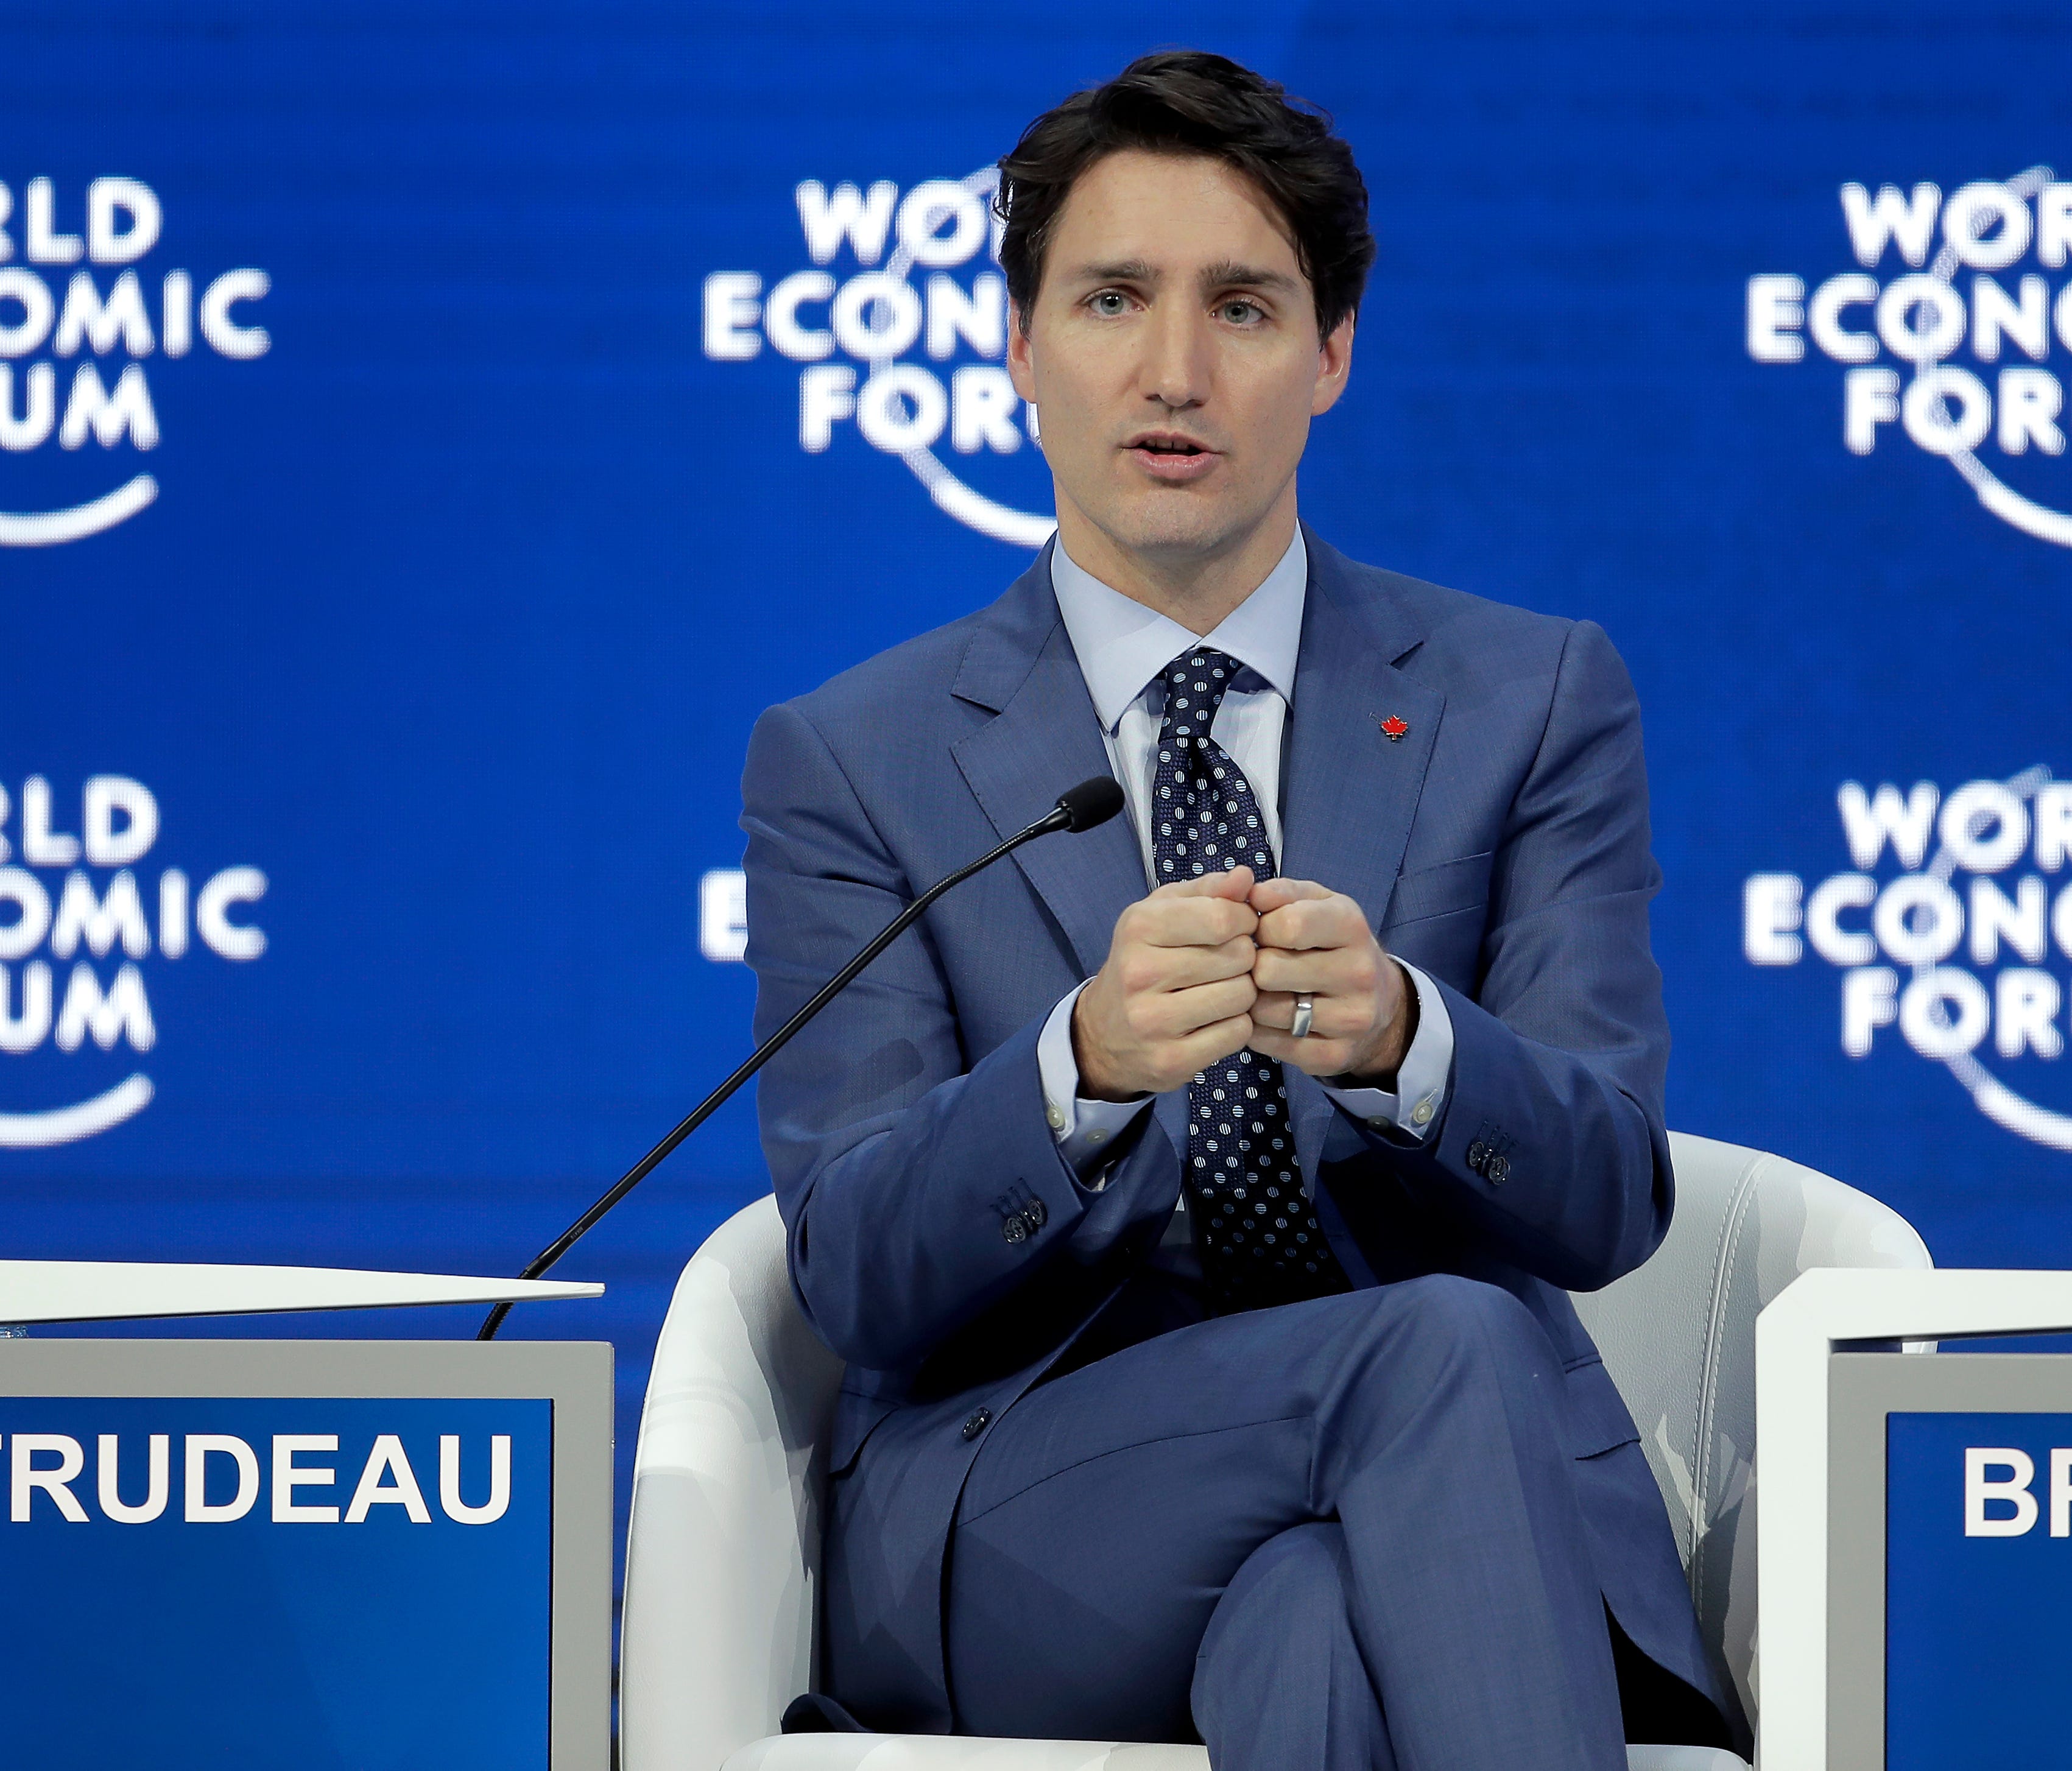 Justin Trudeau, Prime Minister of Canada, gestures during a conversation on corporate responsibility and the role of women in a changing world during the annual meeting of the World Economic Forum in Davos, Switzerland, on Jan. 23, 2018.